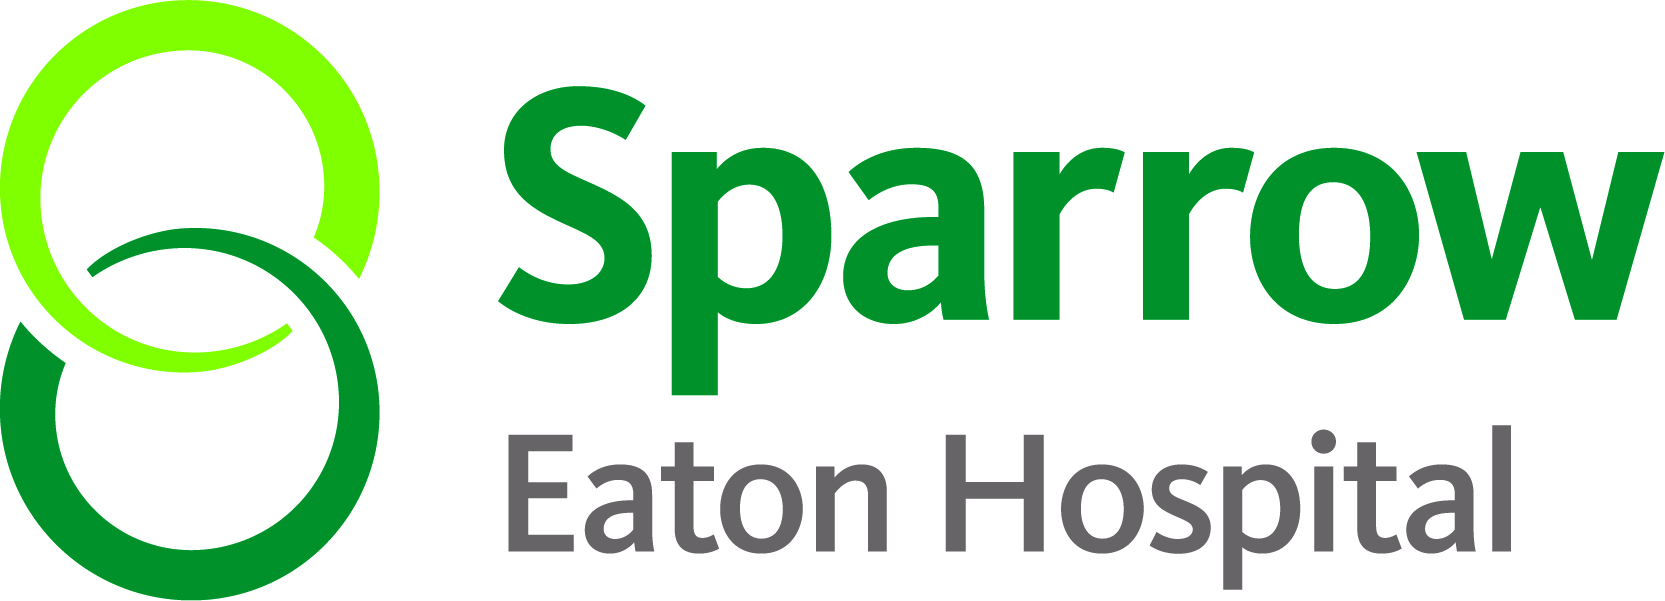 Athletic Trainer Provided in partnership with Sparrow Eaton Hospital